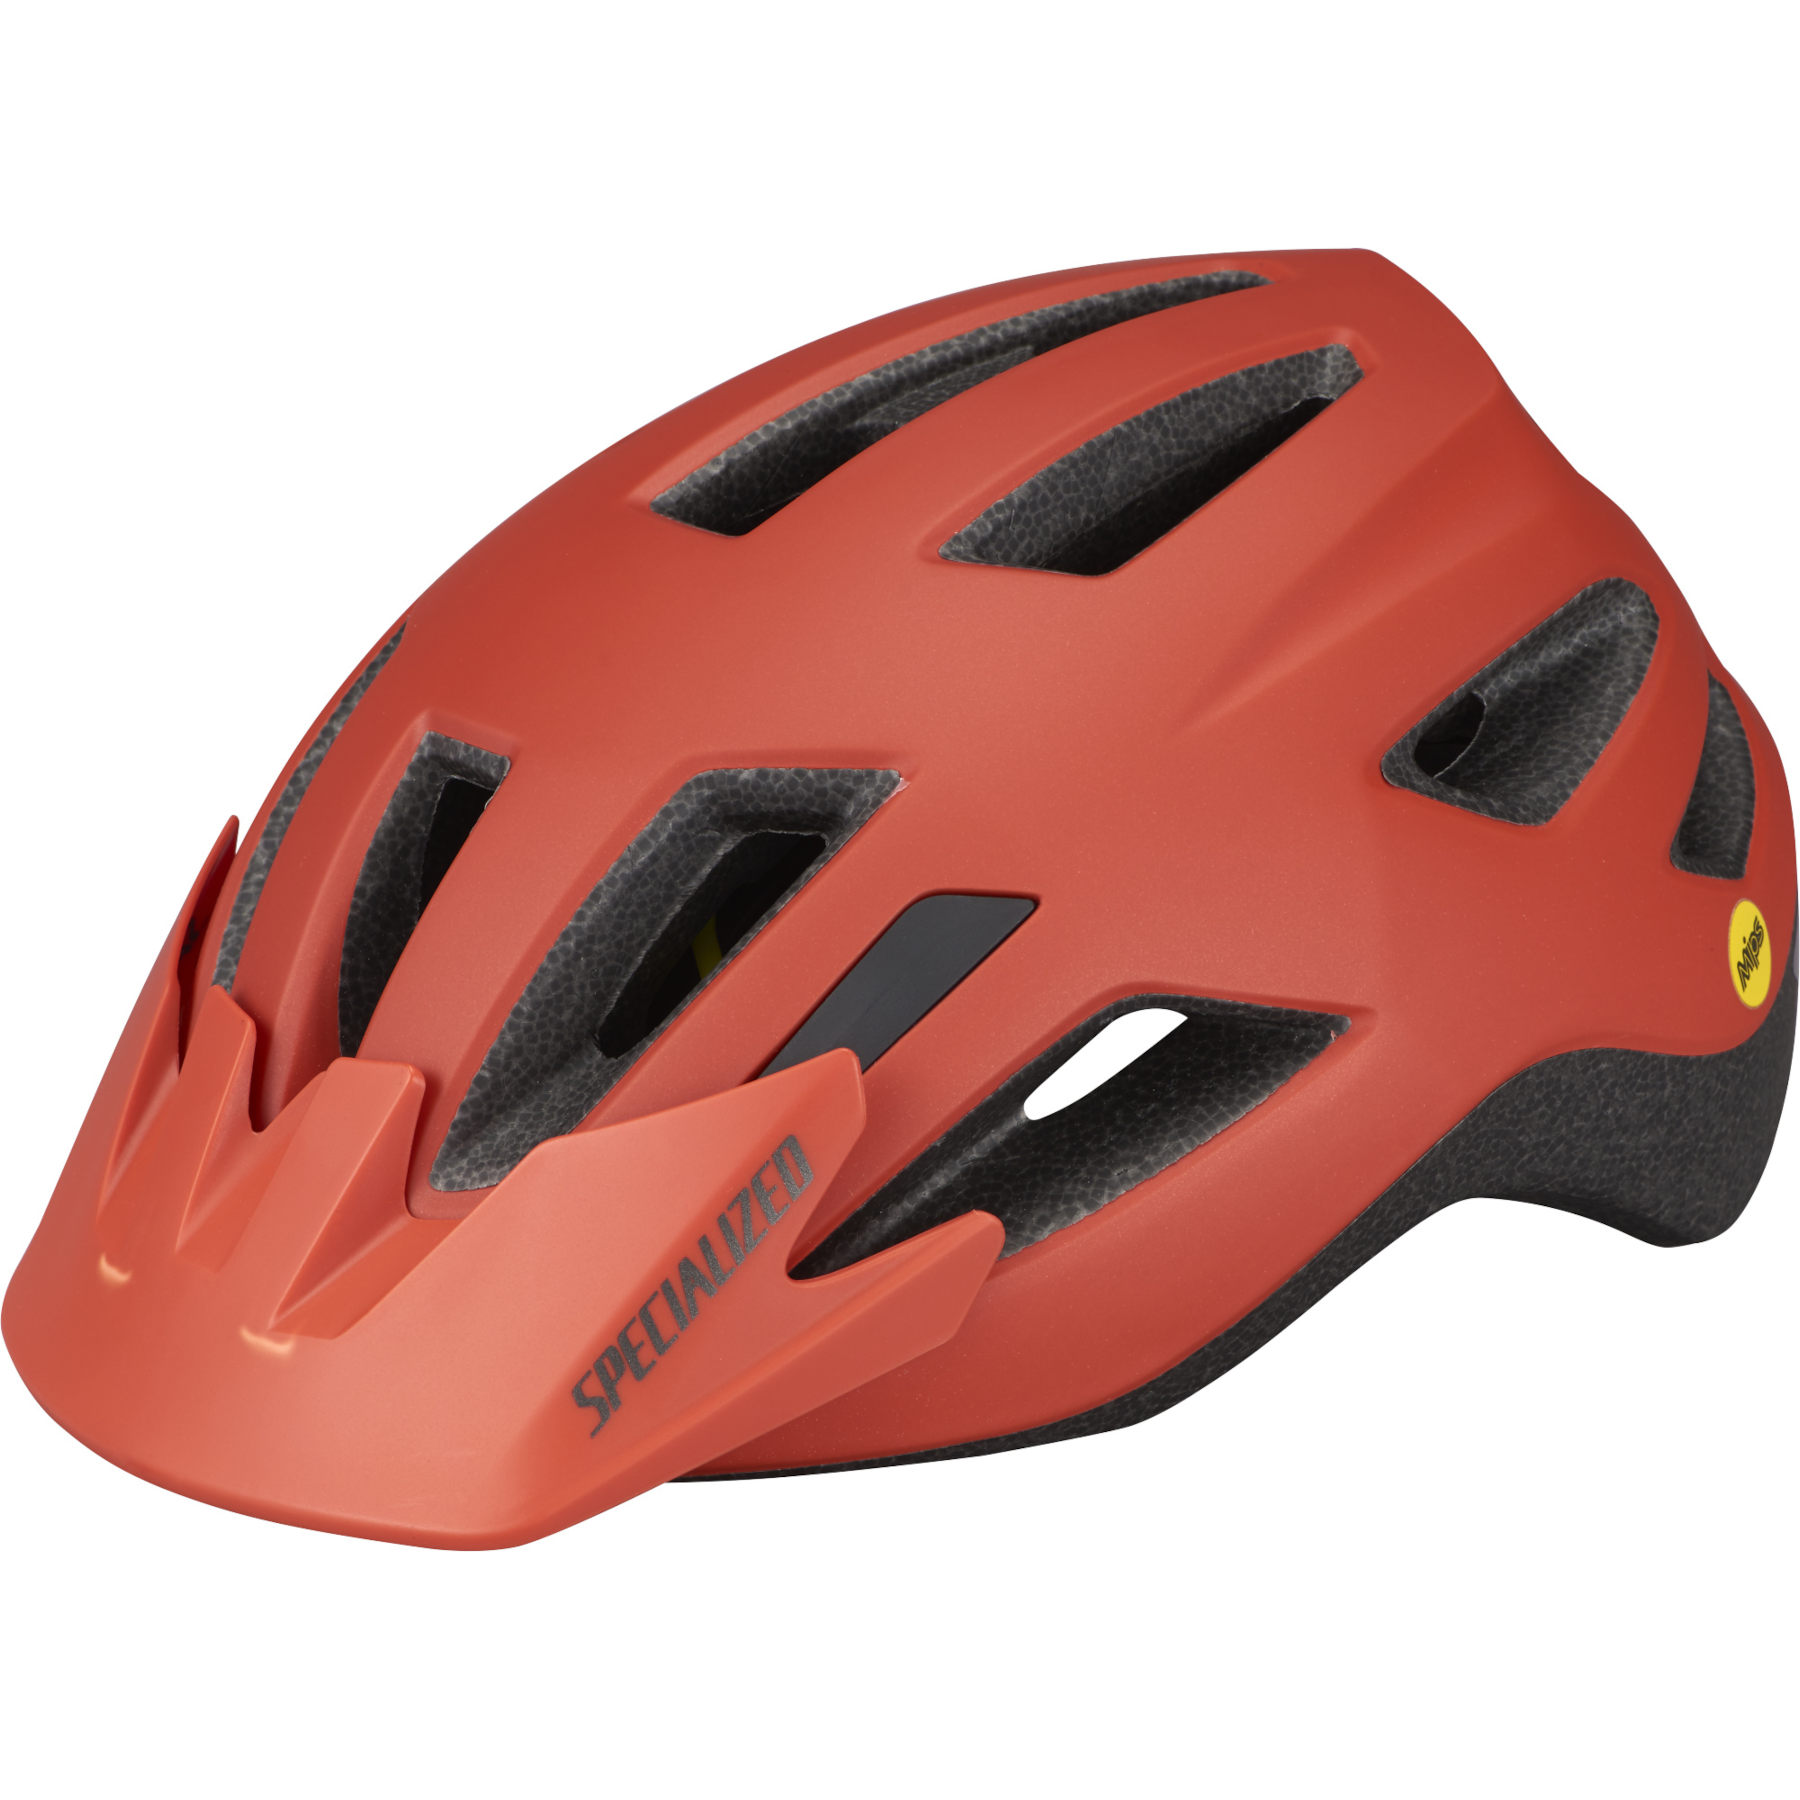 Productfoto van Specialized Shuffle Youth LED SB MIPS Helmet - Satin Redwood